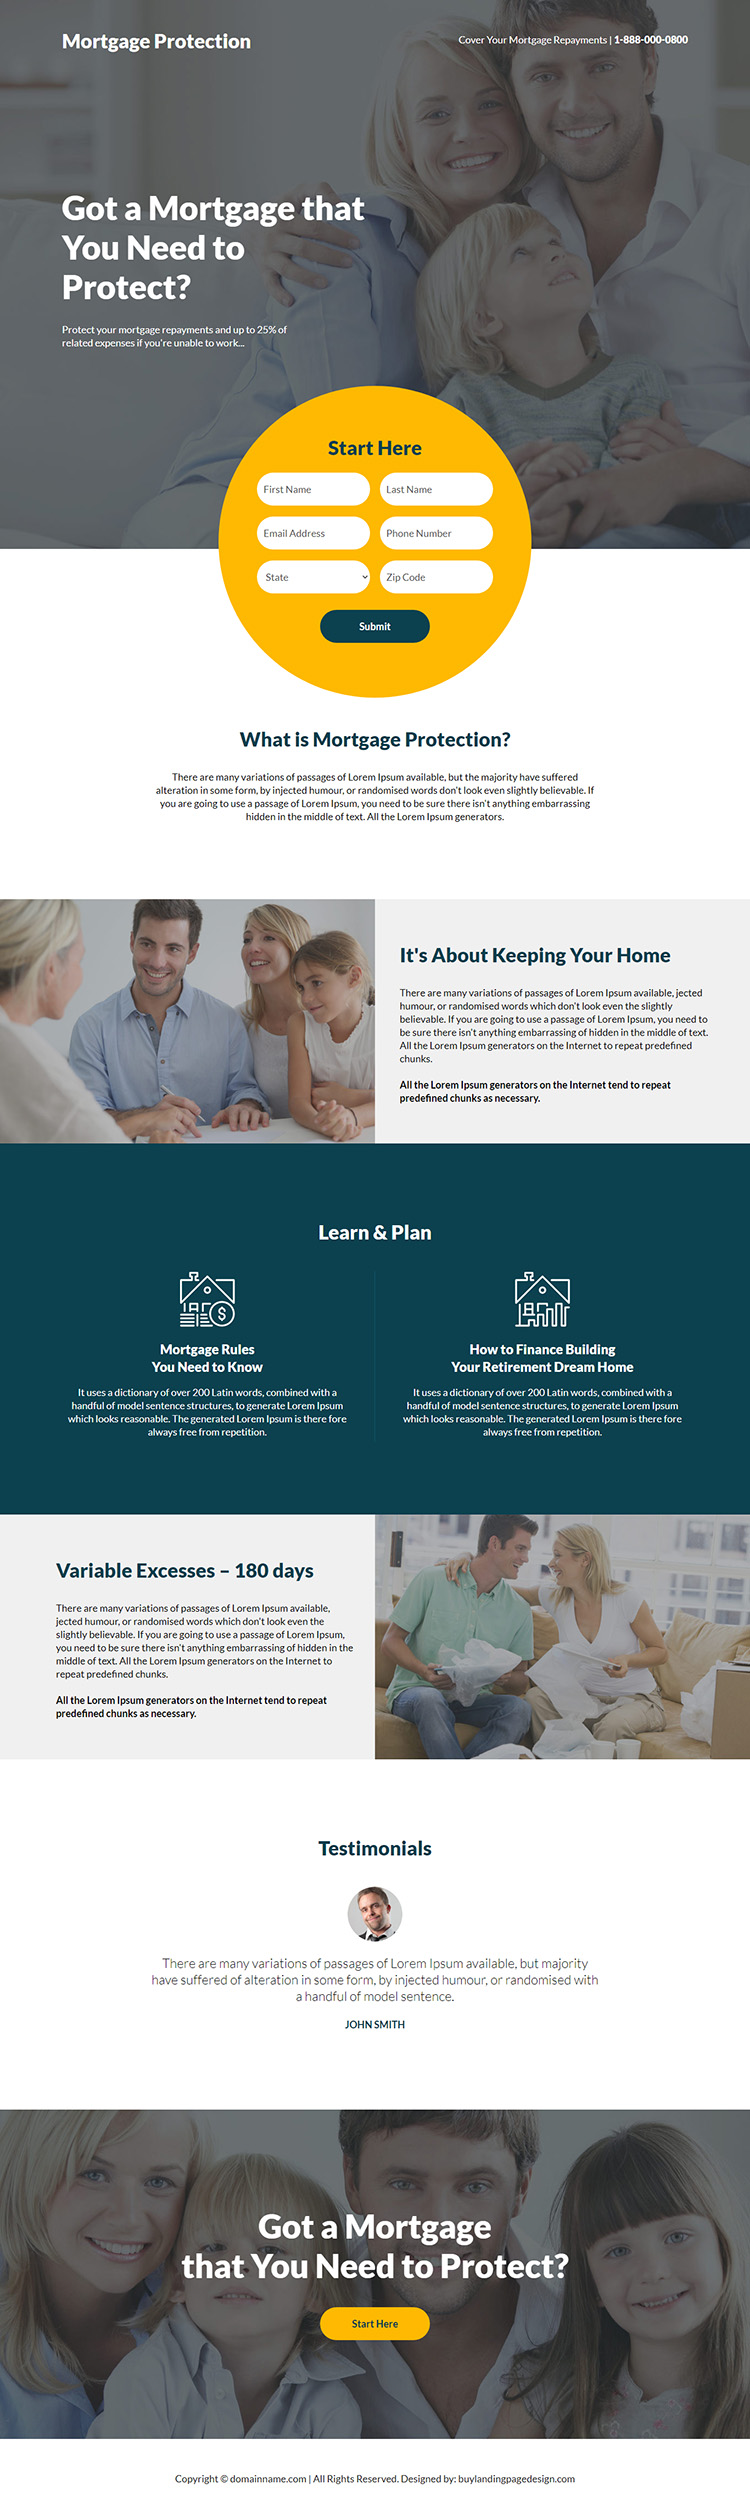 mortgage protection lead capture responsive landing page